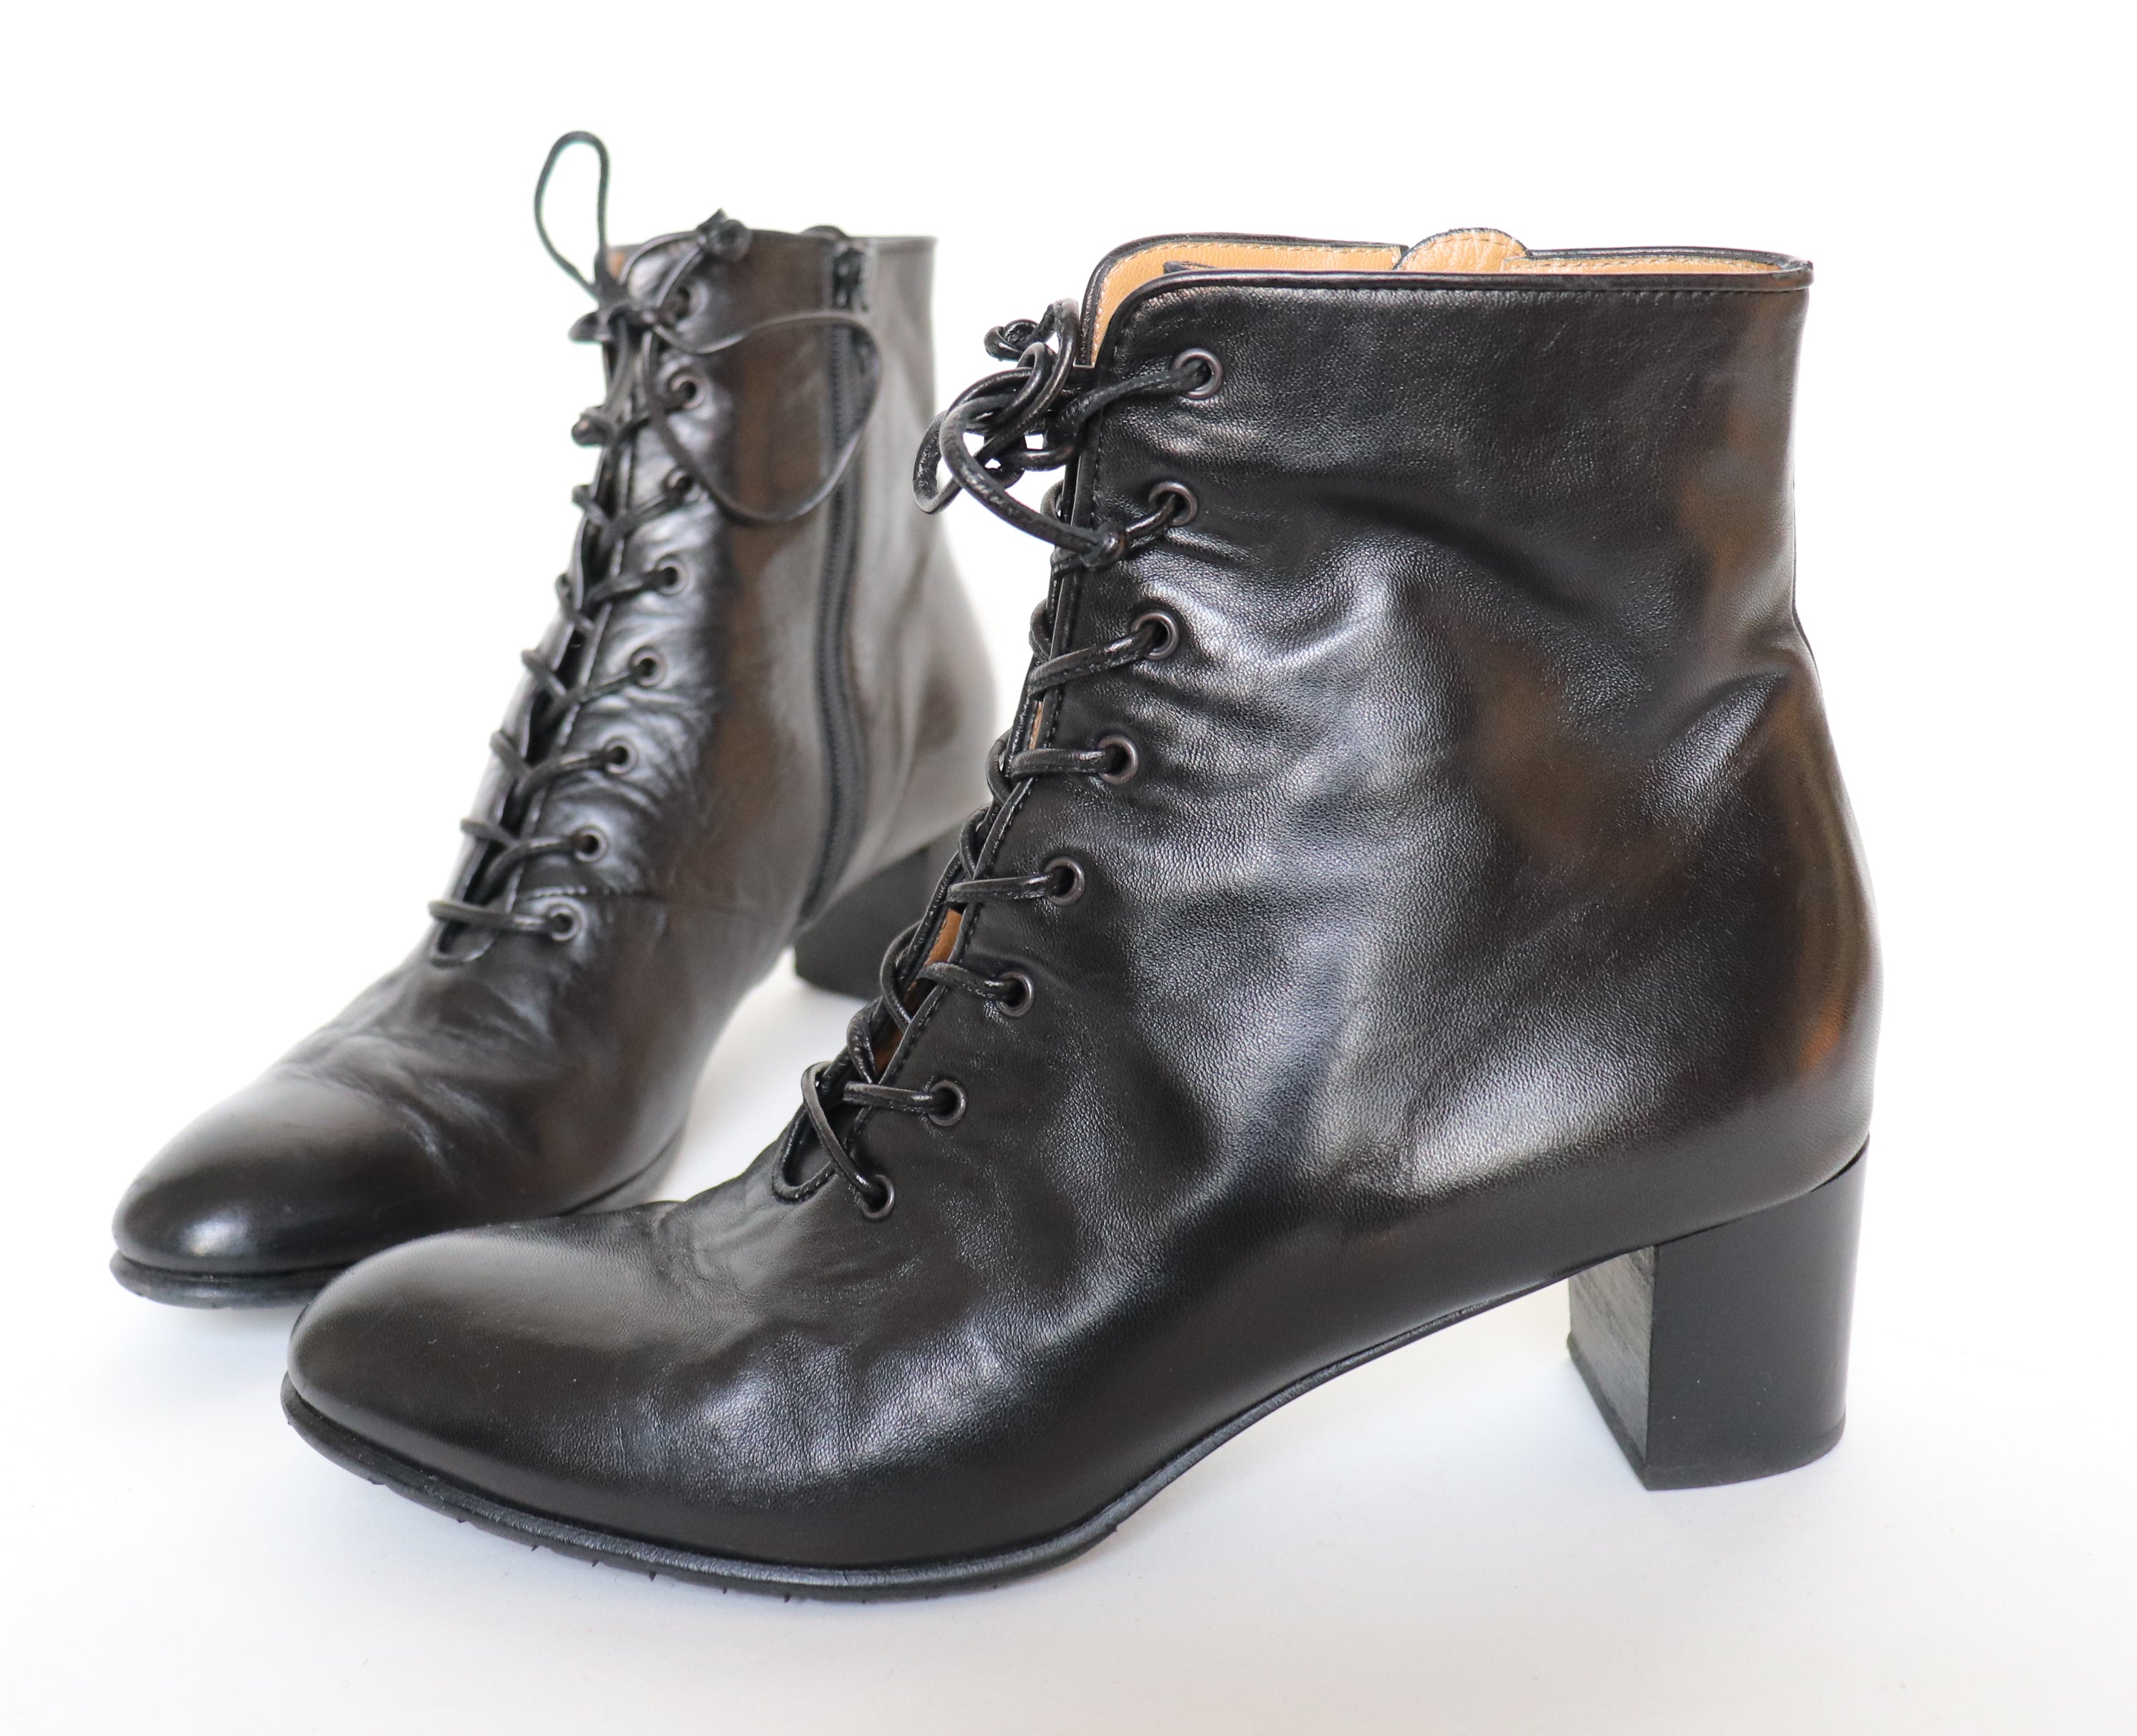 Victorian Boots - Eliot Zed - Black  Leather Lace - Up Ankle Boots -  39 / UK 6